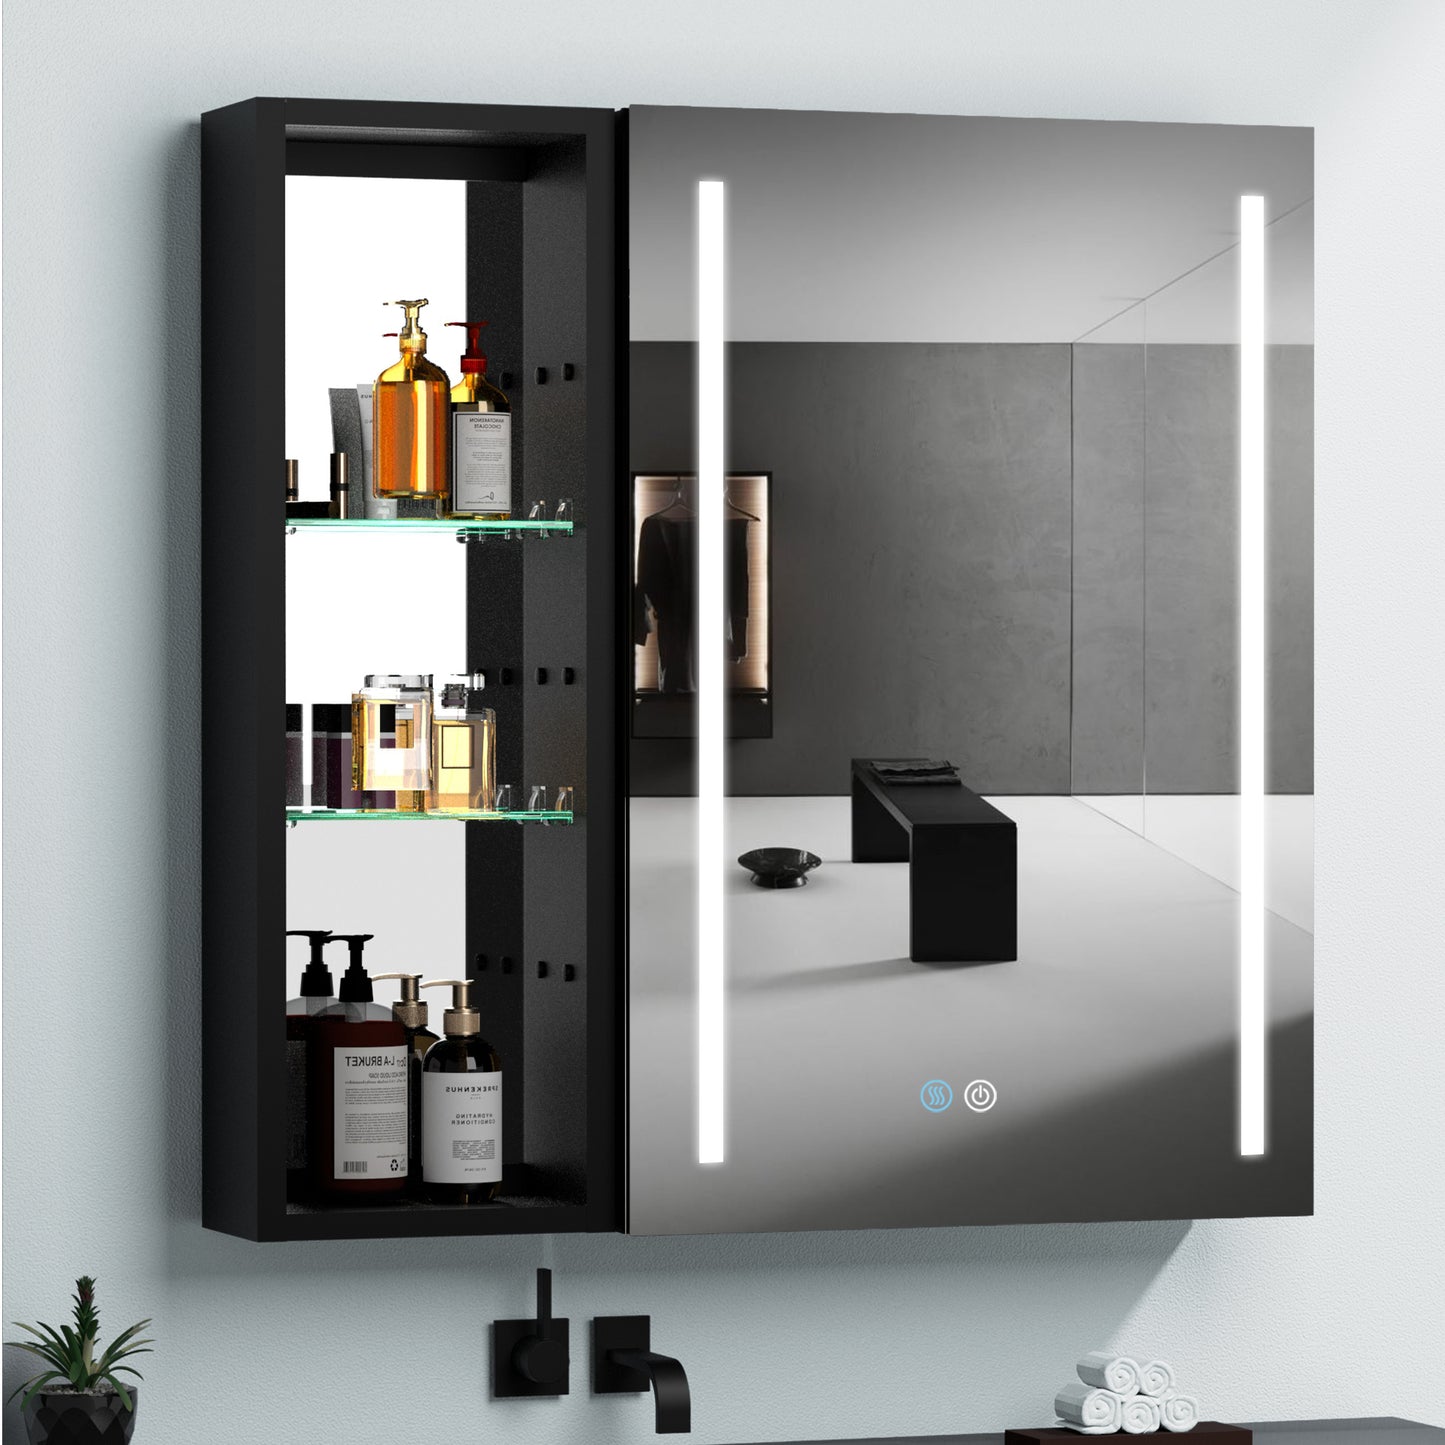 30x30 inch Bathroom Medicine Cabinets Surface Mounted Cabinets With Lighted Mirror, Small Cabinet No Door